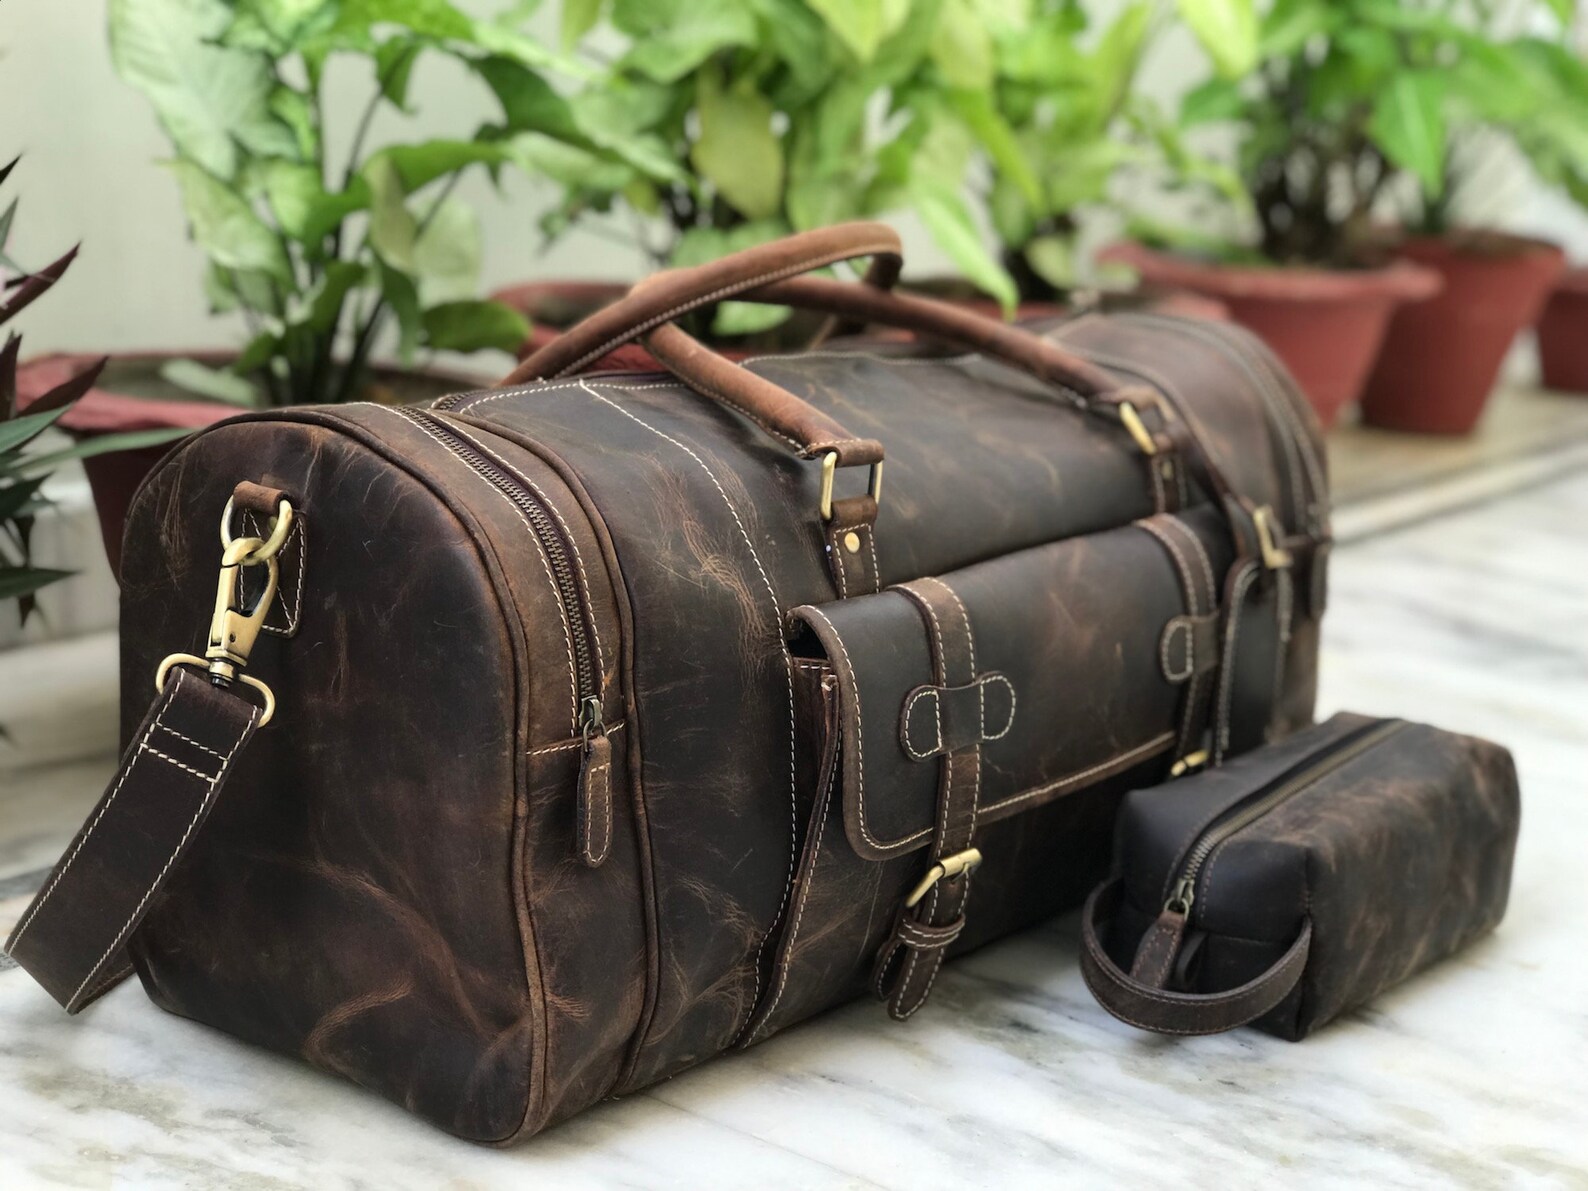 Combo Offer: Leather Duffle Bag With Free Dopp Kit Leather | Etsy